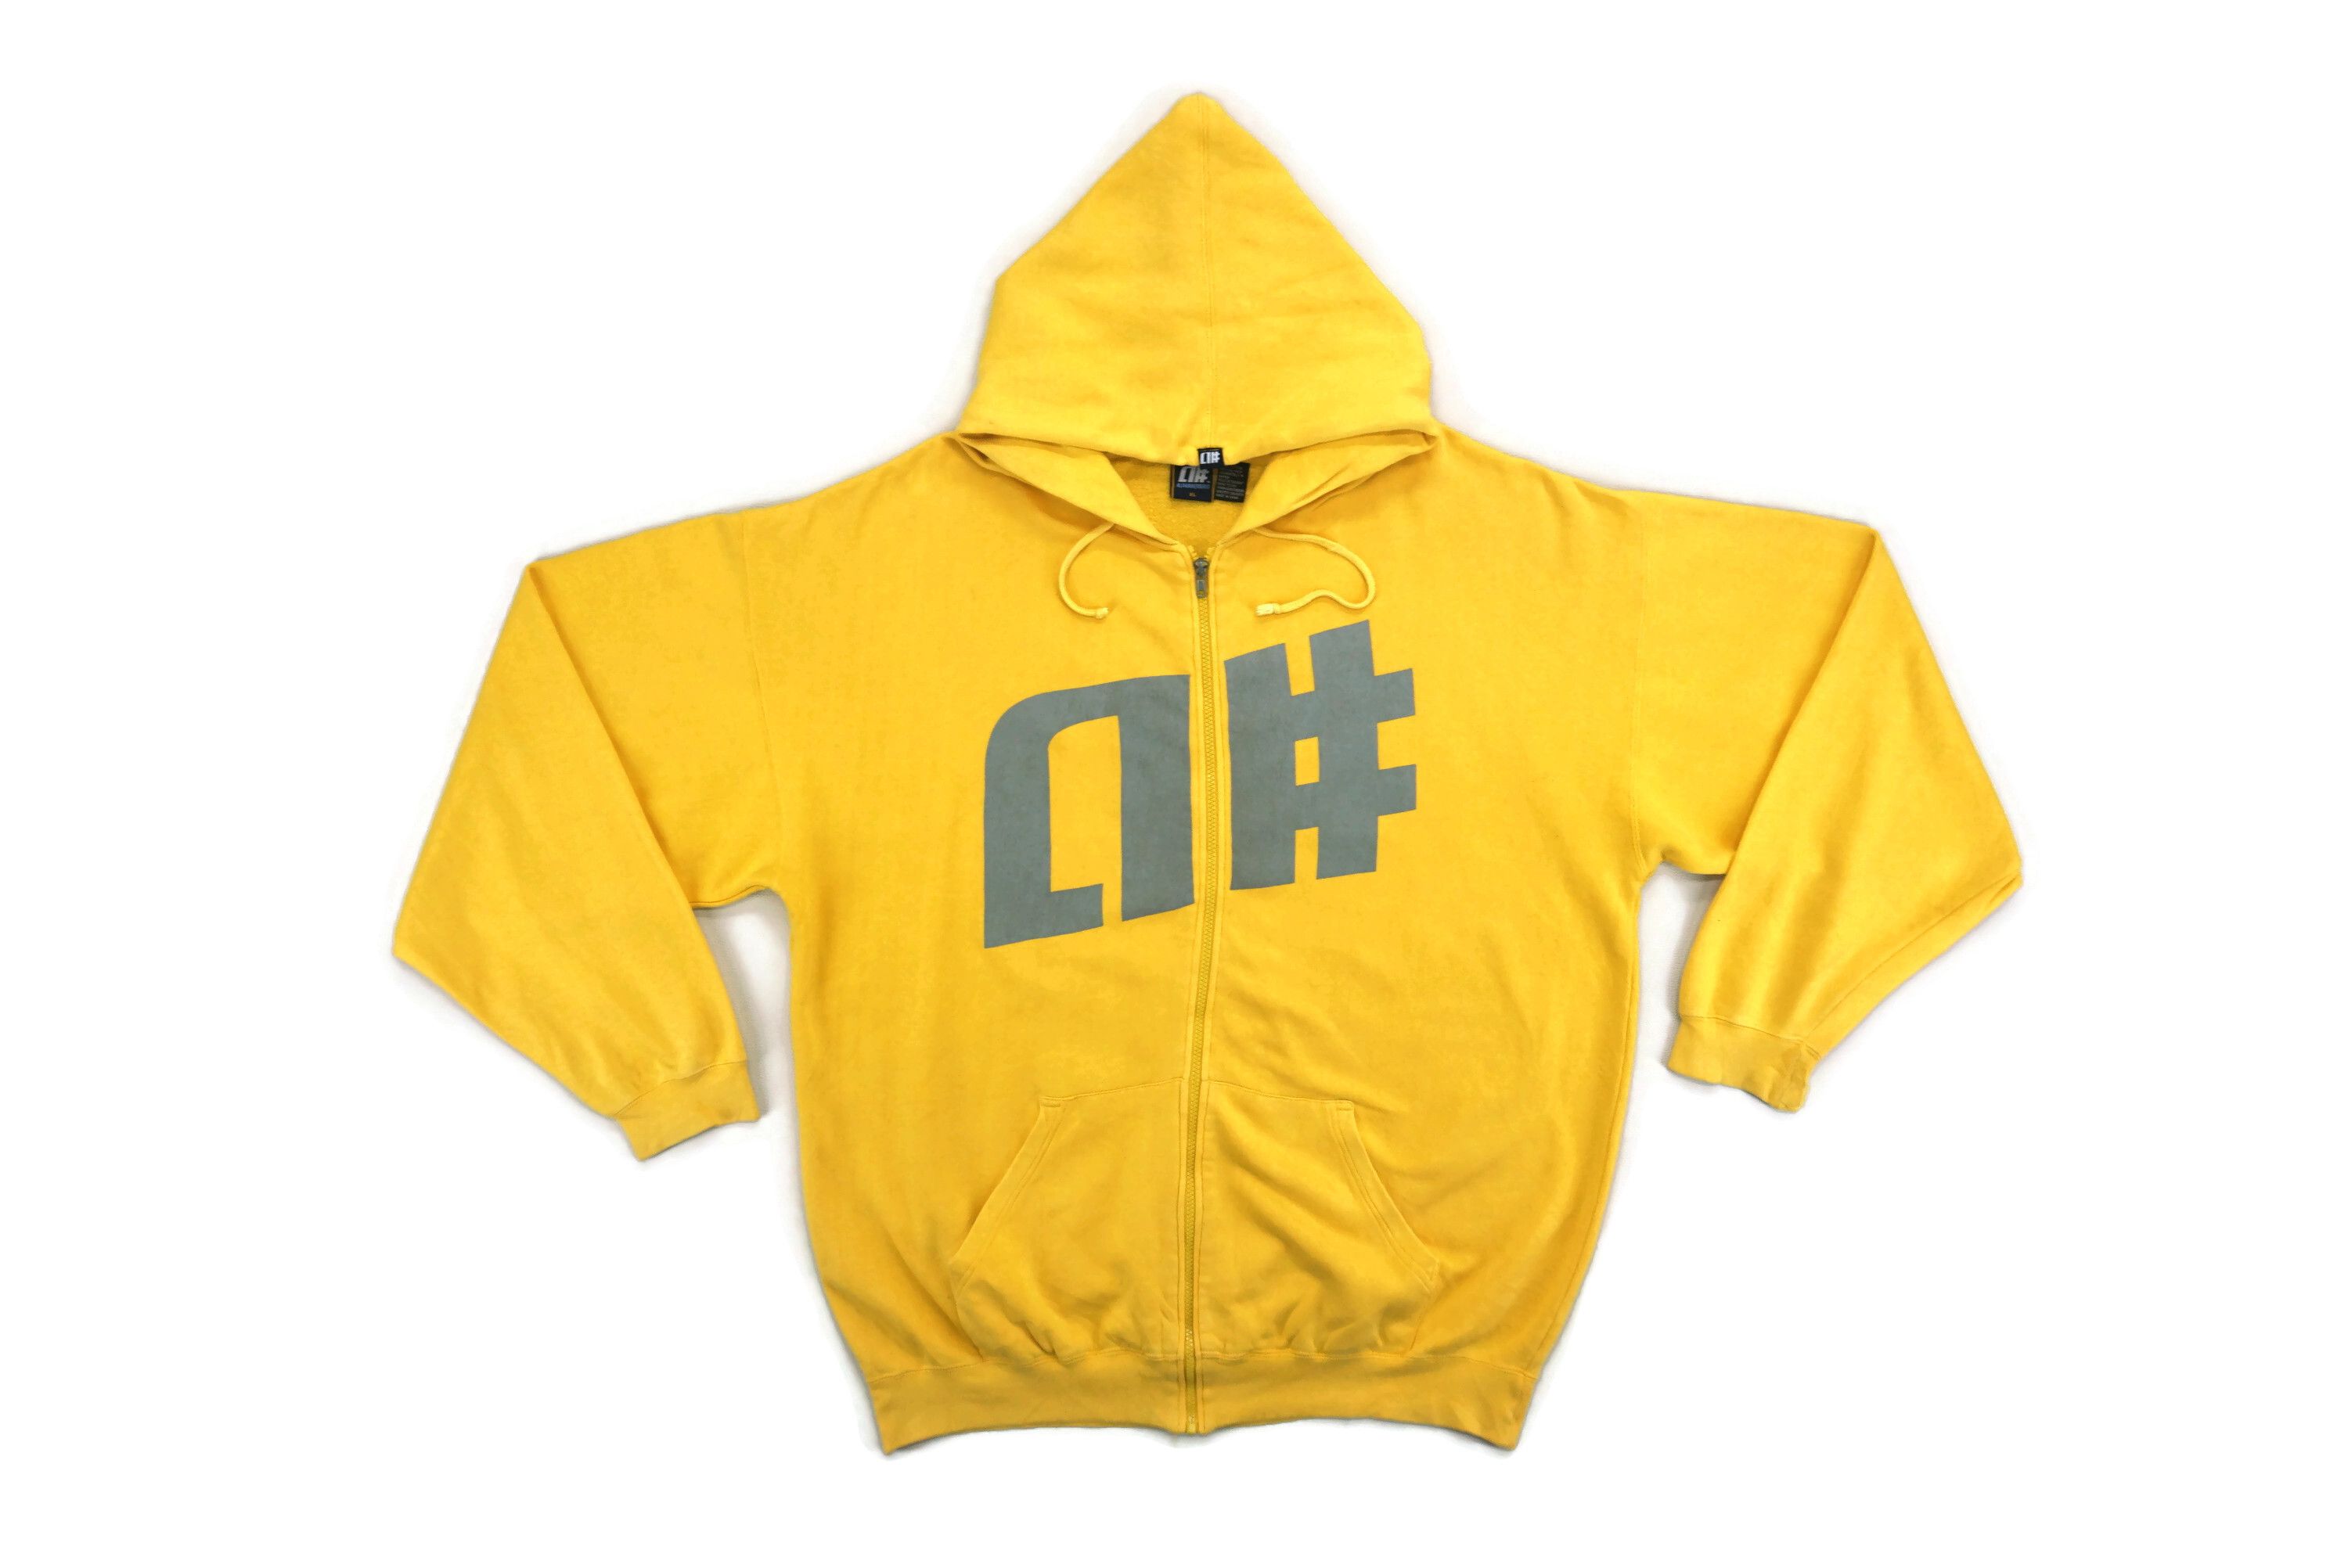 Alpha Numeric Clothing Alphanumeric A# Big Logo Full Zip Up Hoodie Oversized Baggy Size US XL / EU 56 / 4 - 1 Preview